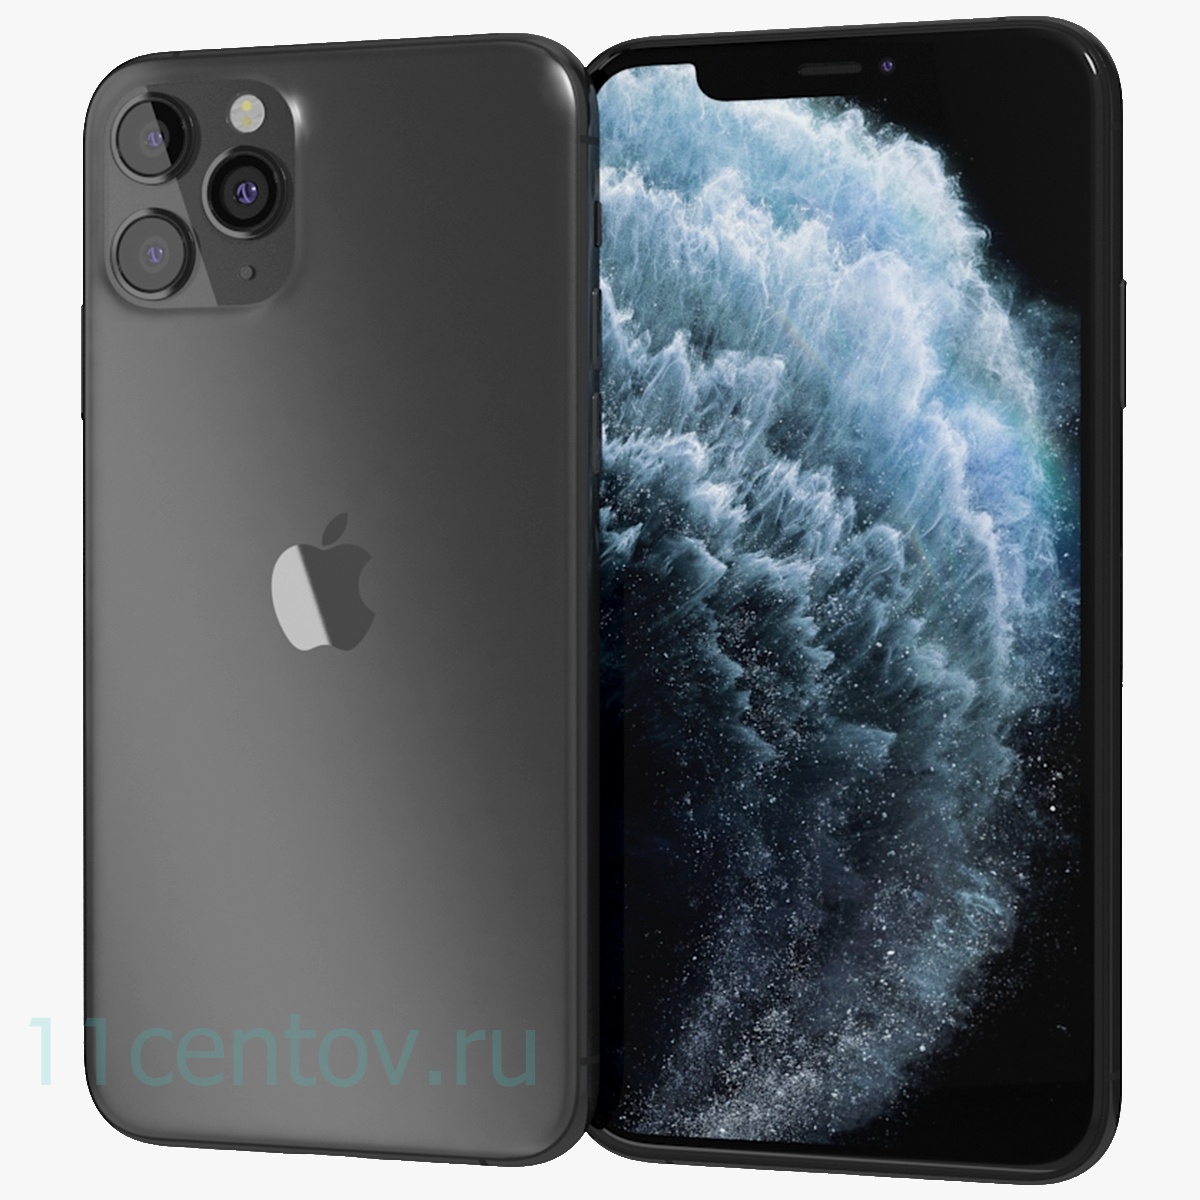 Iphone 11 Pro Max 256gb Space Gray